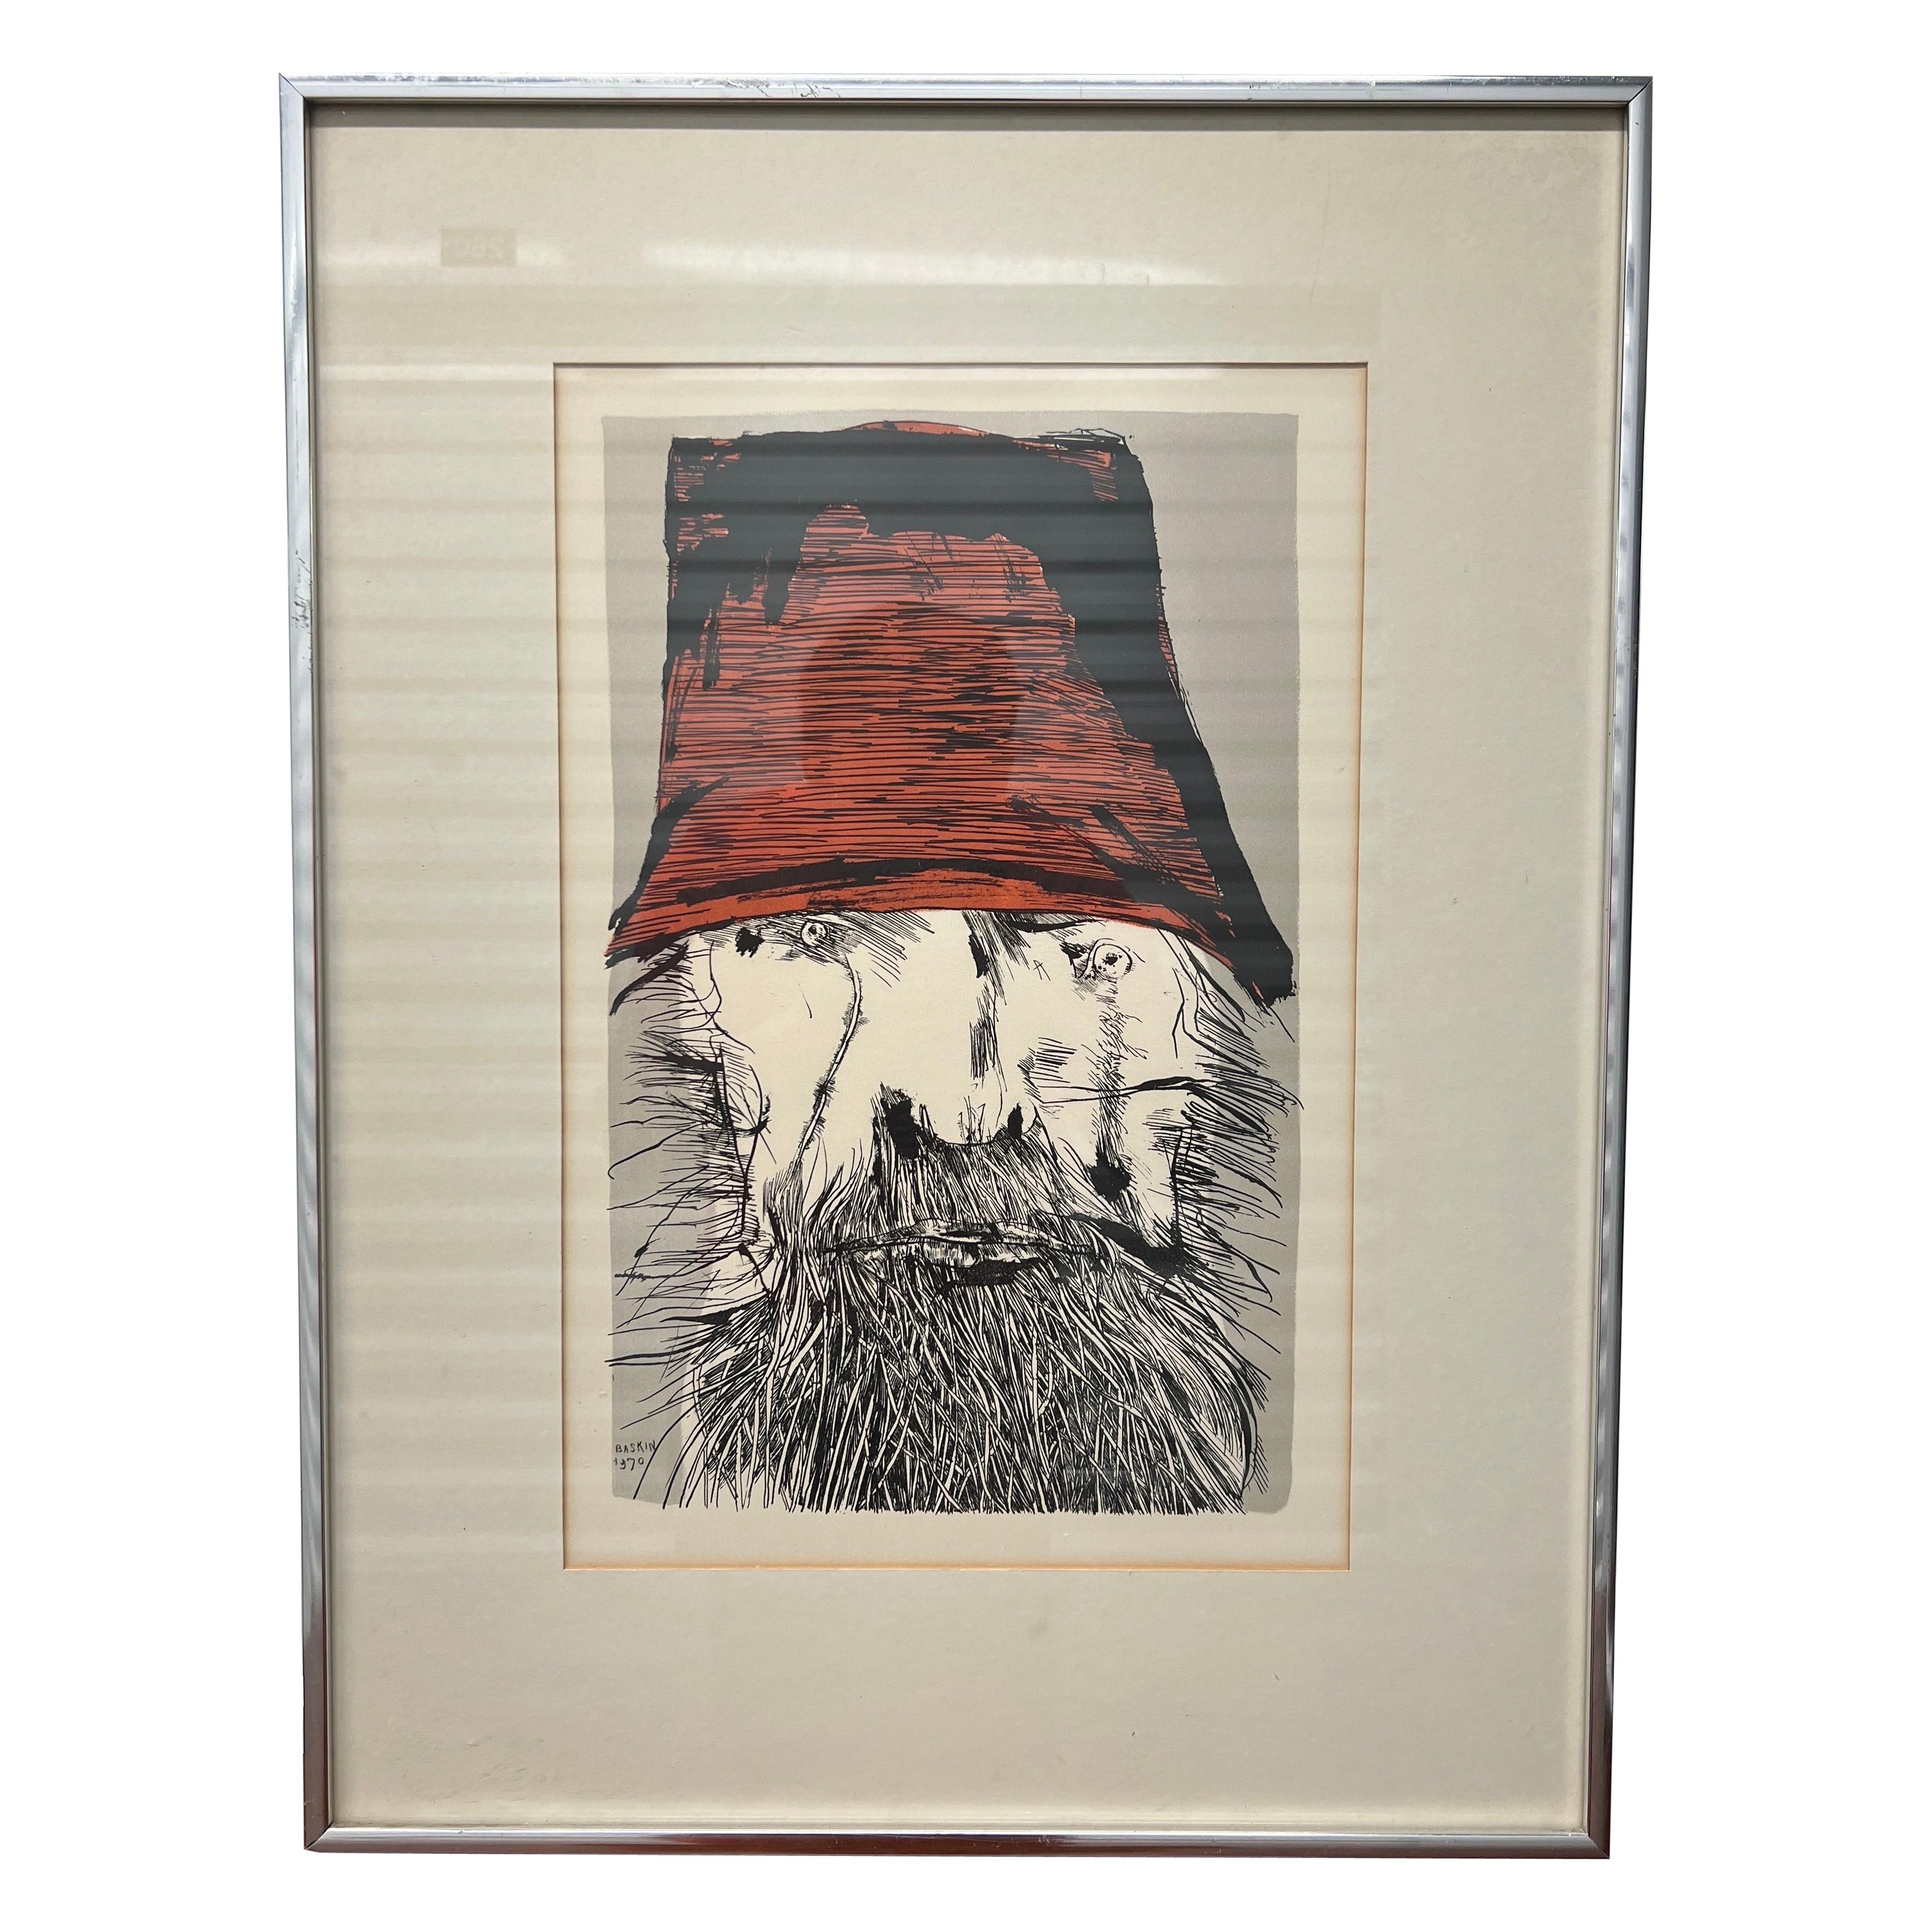 Vintage Leonard Baskin "Ahab With Red Hat" Lithograph 